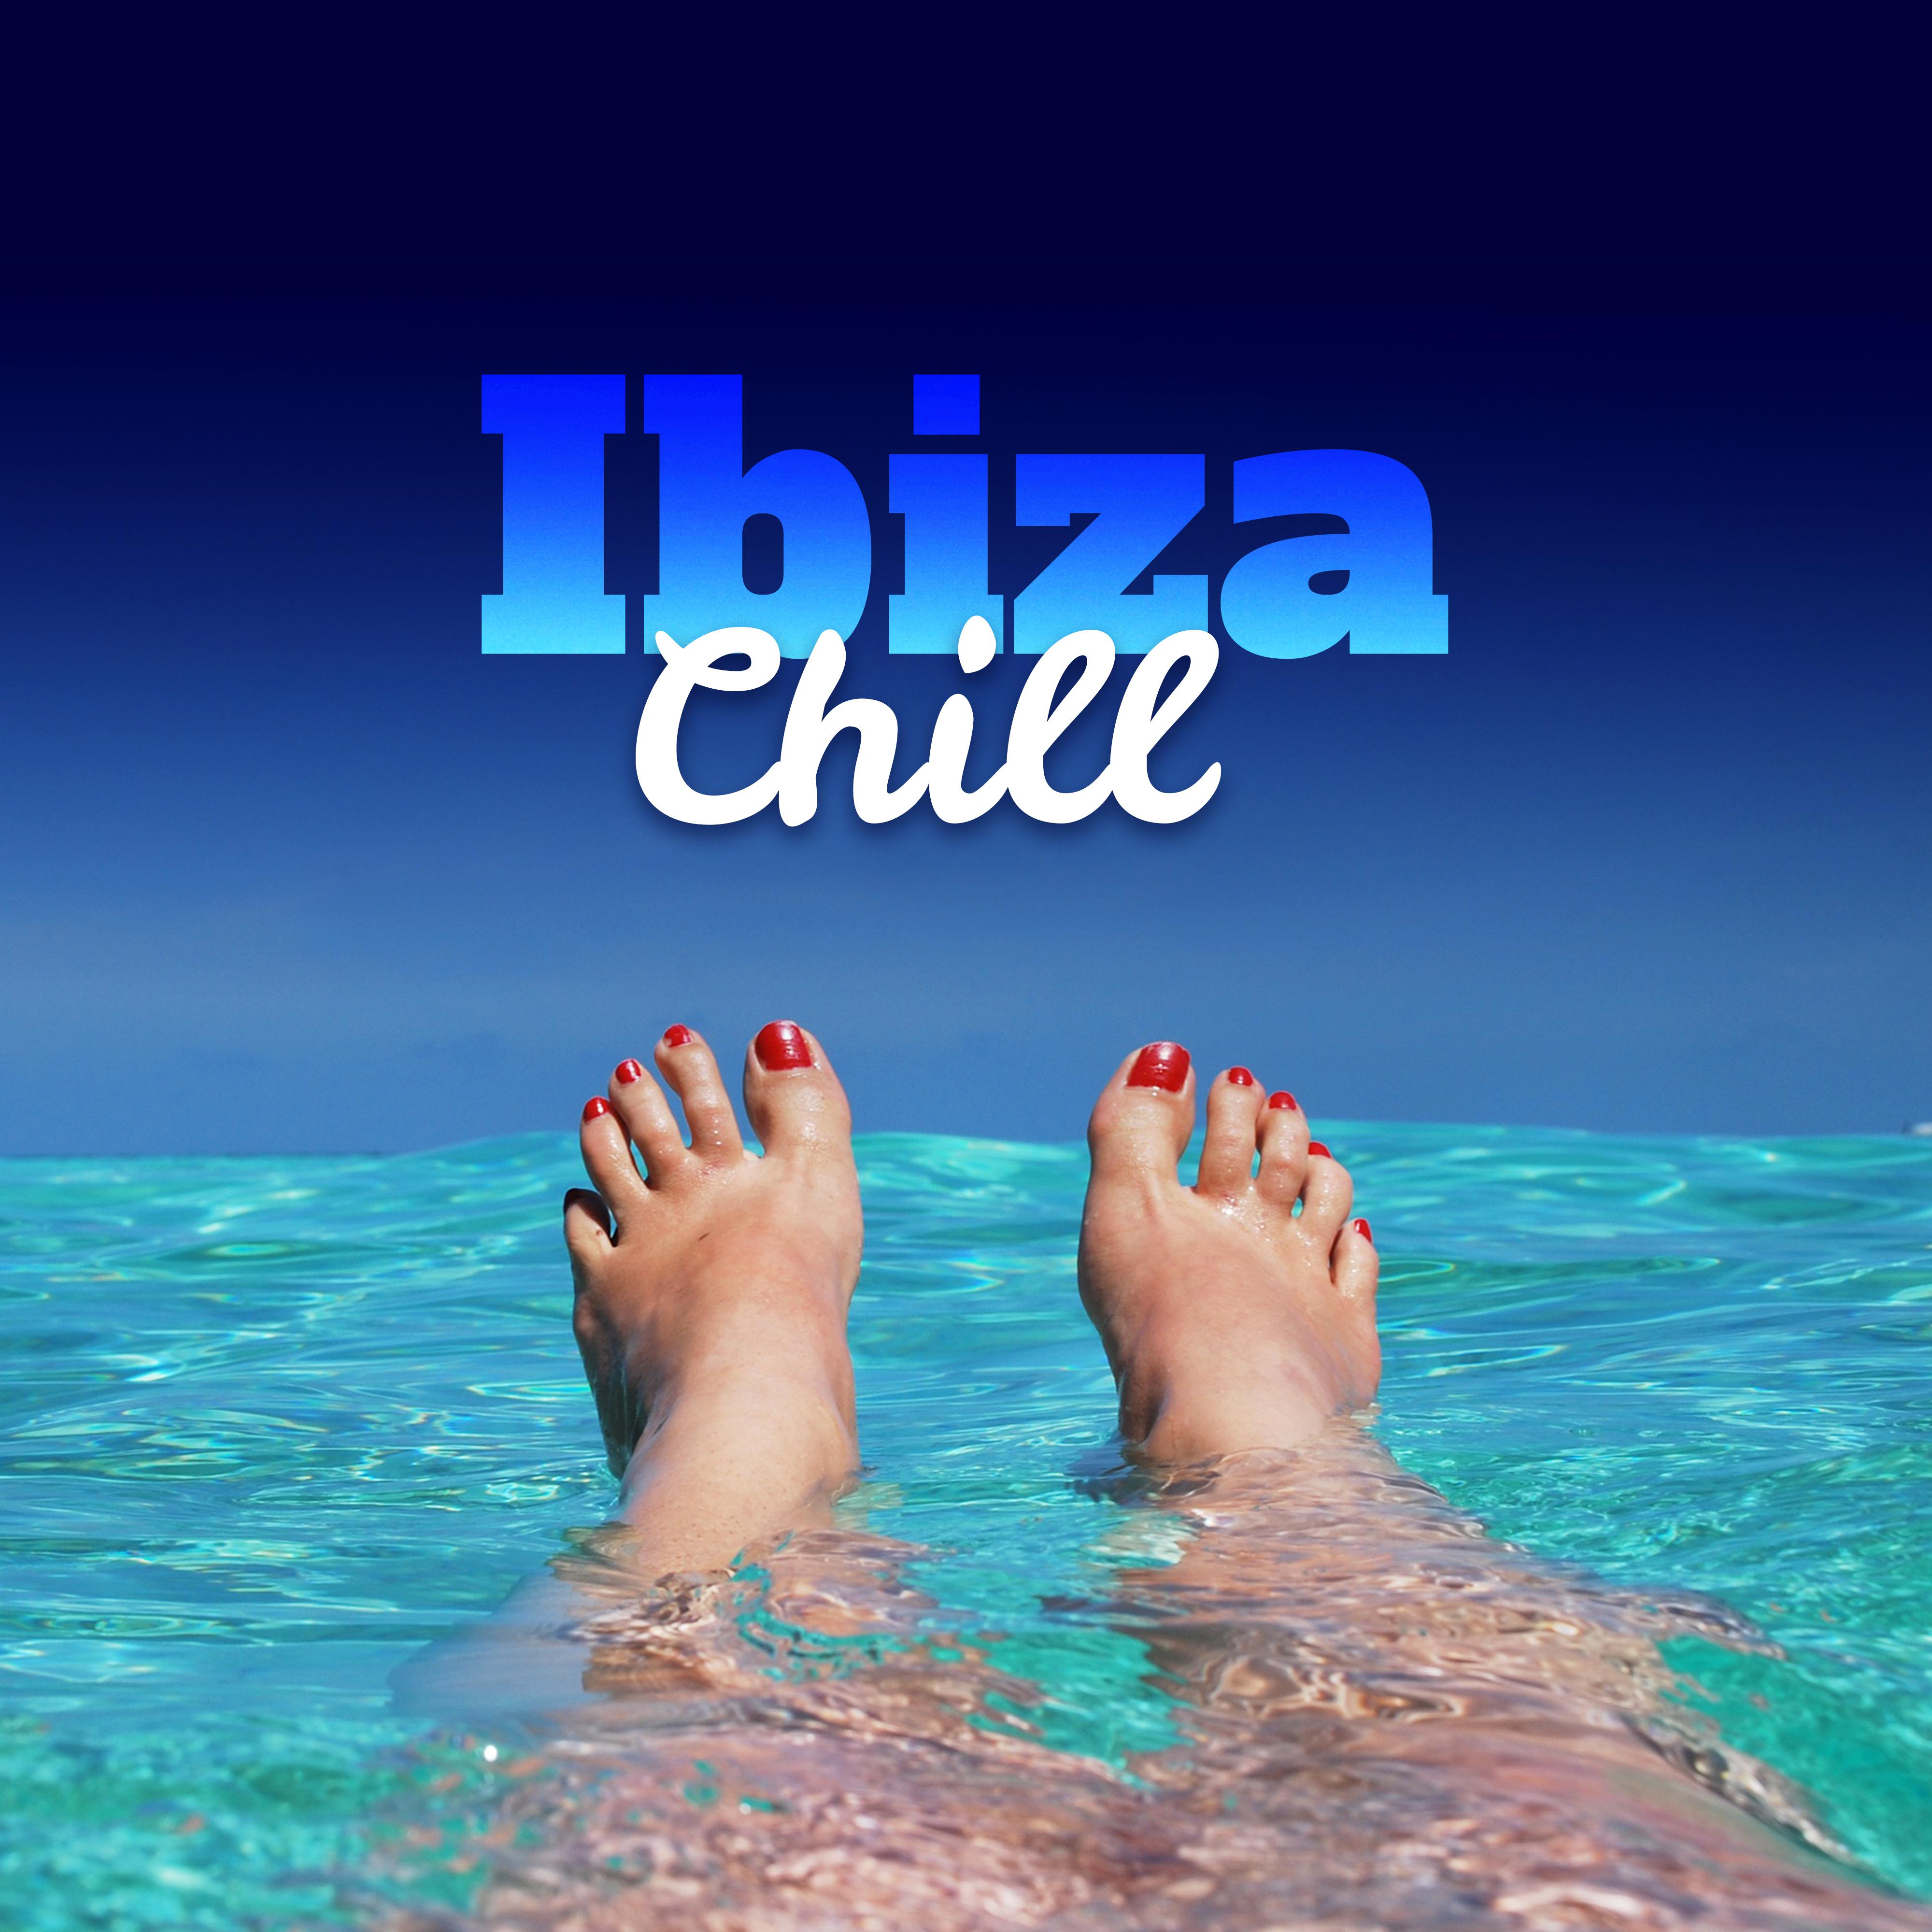 Ibiza Chill – Paradise Beach, Relax, Chill Out 2017, Pure Rest, Lounge Summer, Beach Party, Ibiza Chill Out